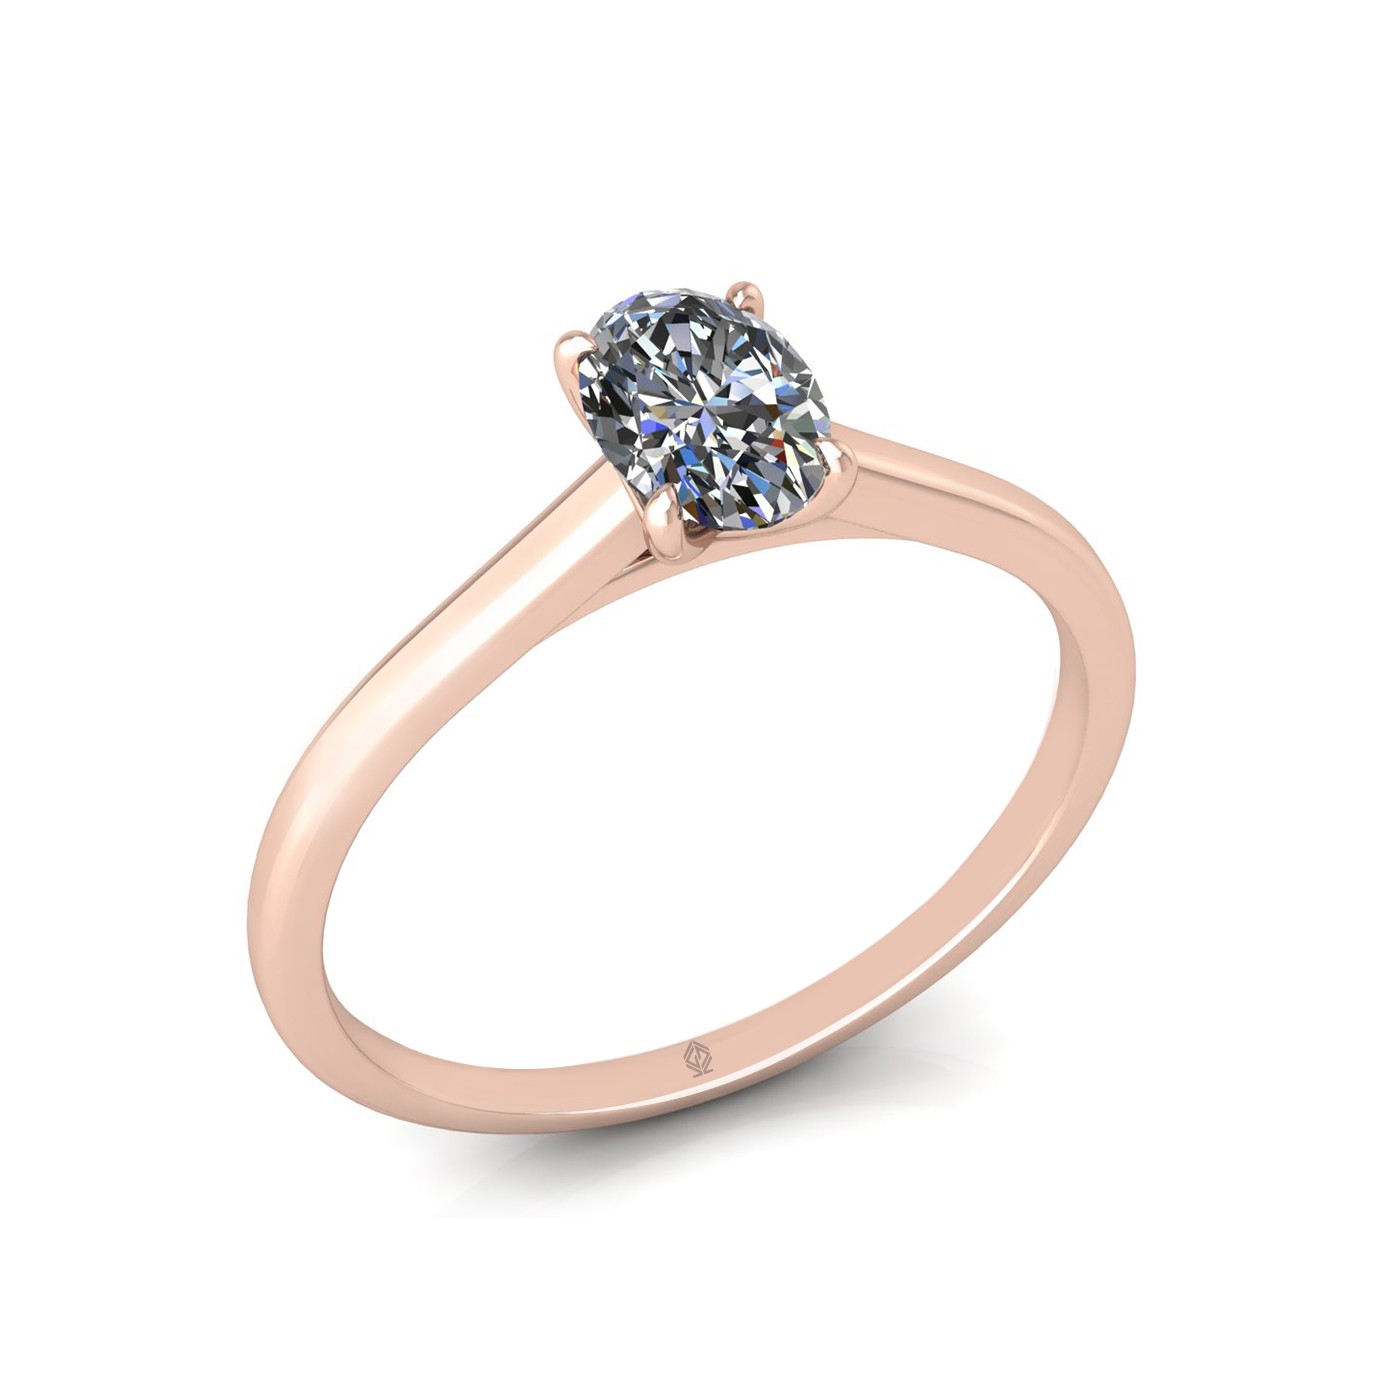 18k rose gold  0,50 ct 4 prongs solitaire oval cut diamond engagement ring with whisper thin band